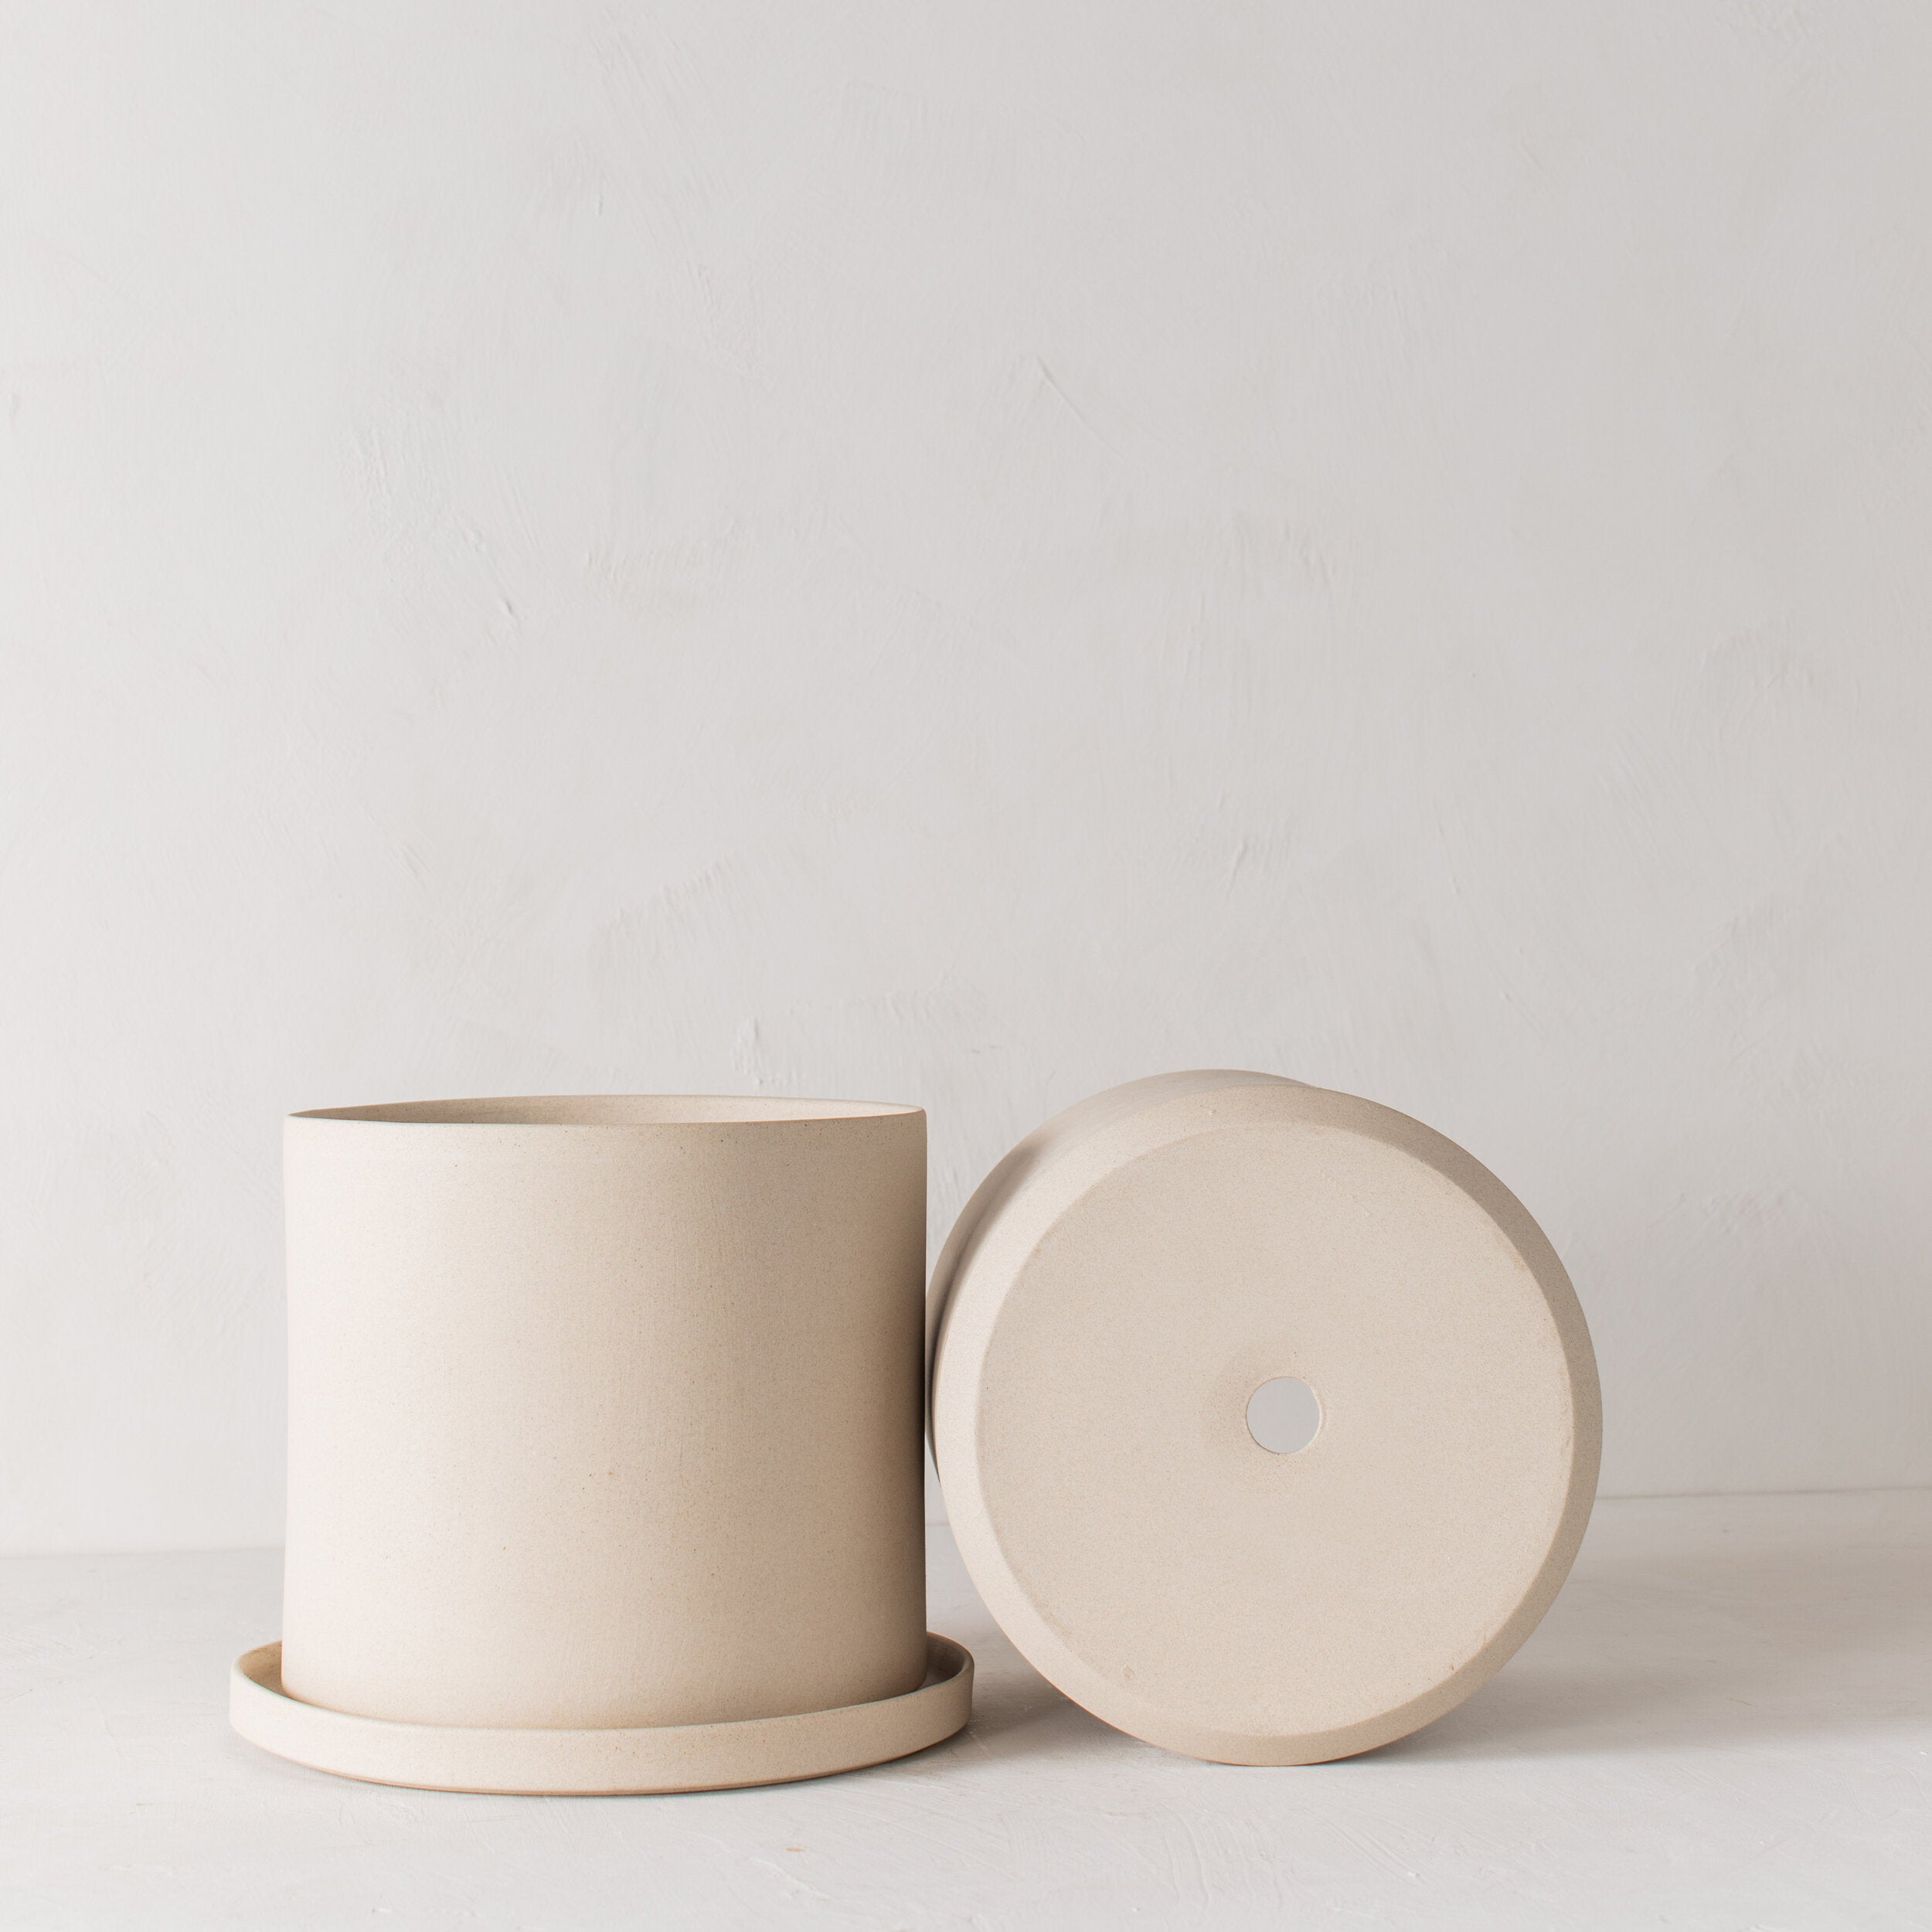 Two stoneware 10 inch ceramic planters with bottom drainage dish, one on its side with a drainage hole. Staged on a white plaster textured tabletop against a plaster textured white wall. Designed and sold by Convivial Production, Kansas City Ceramics.  Edit alt text